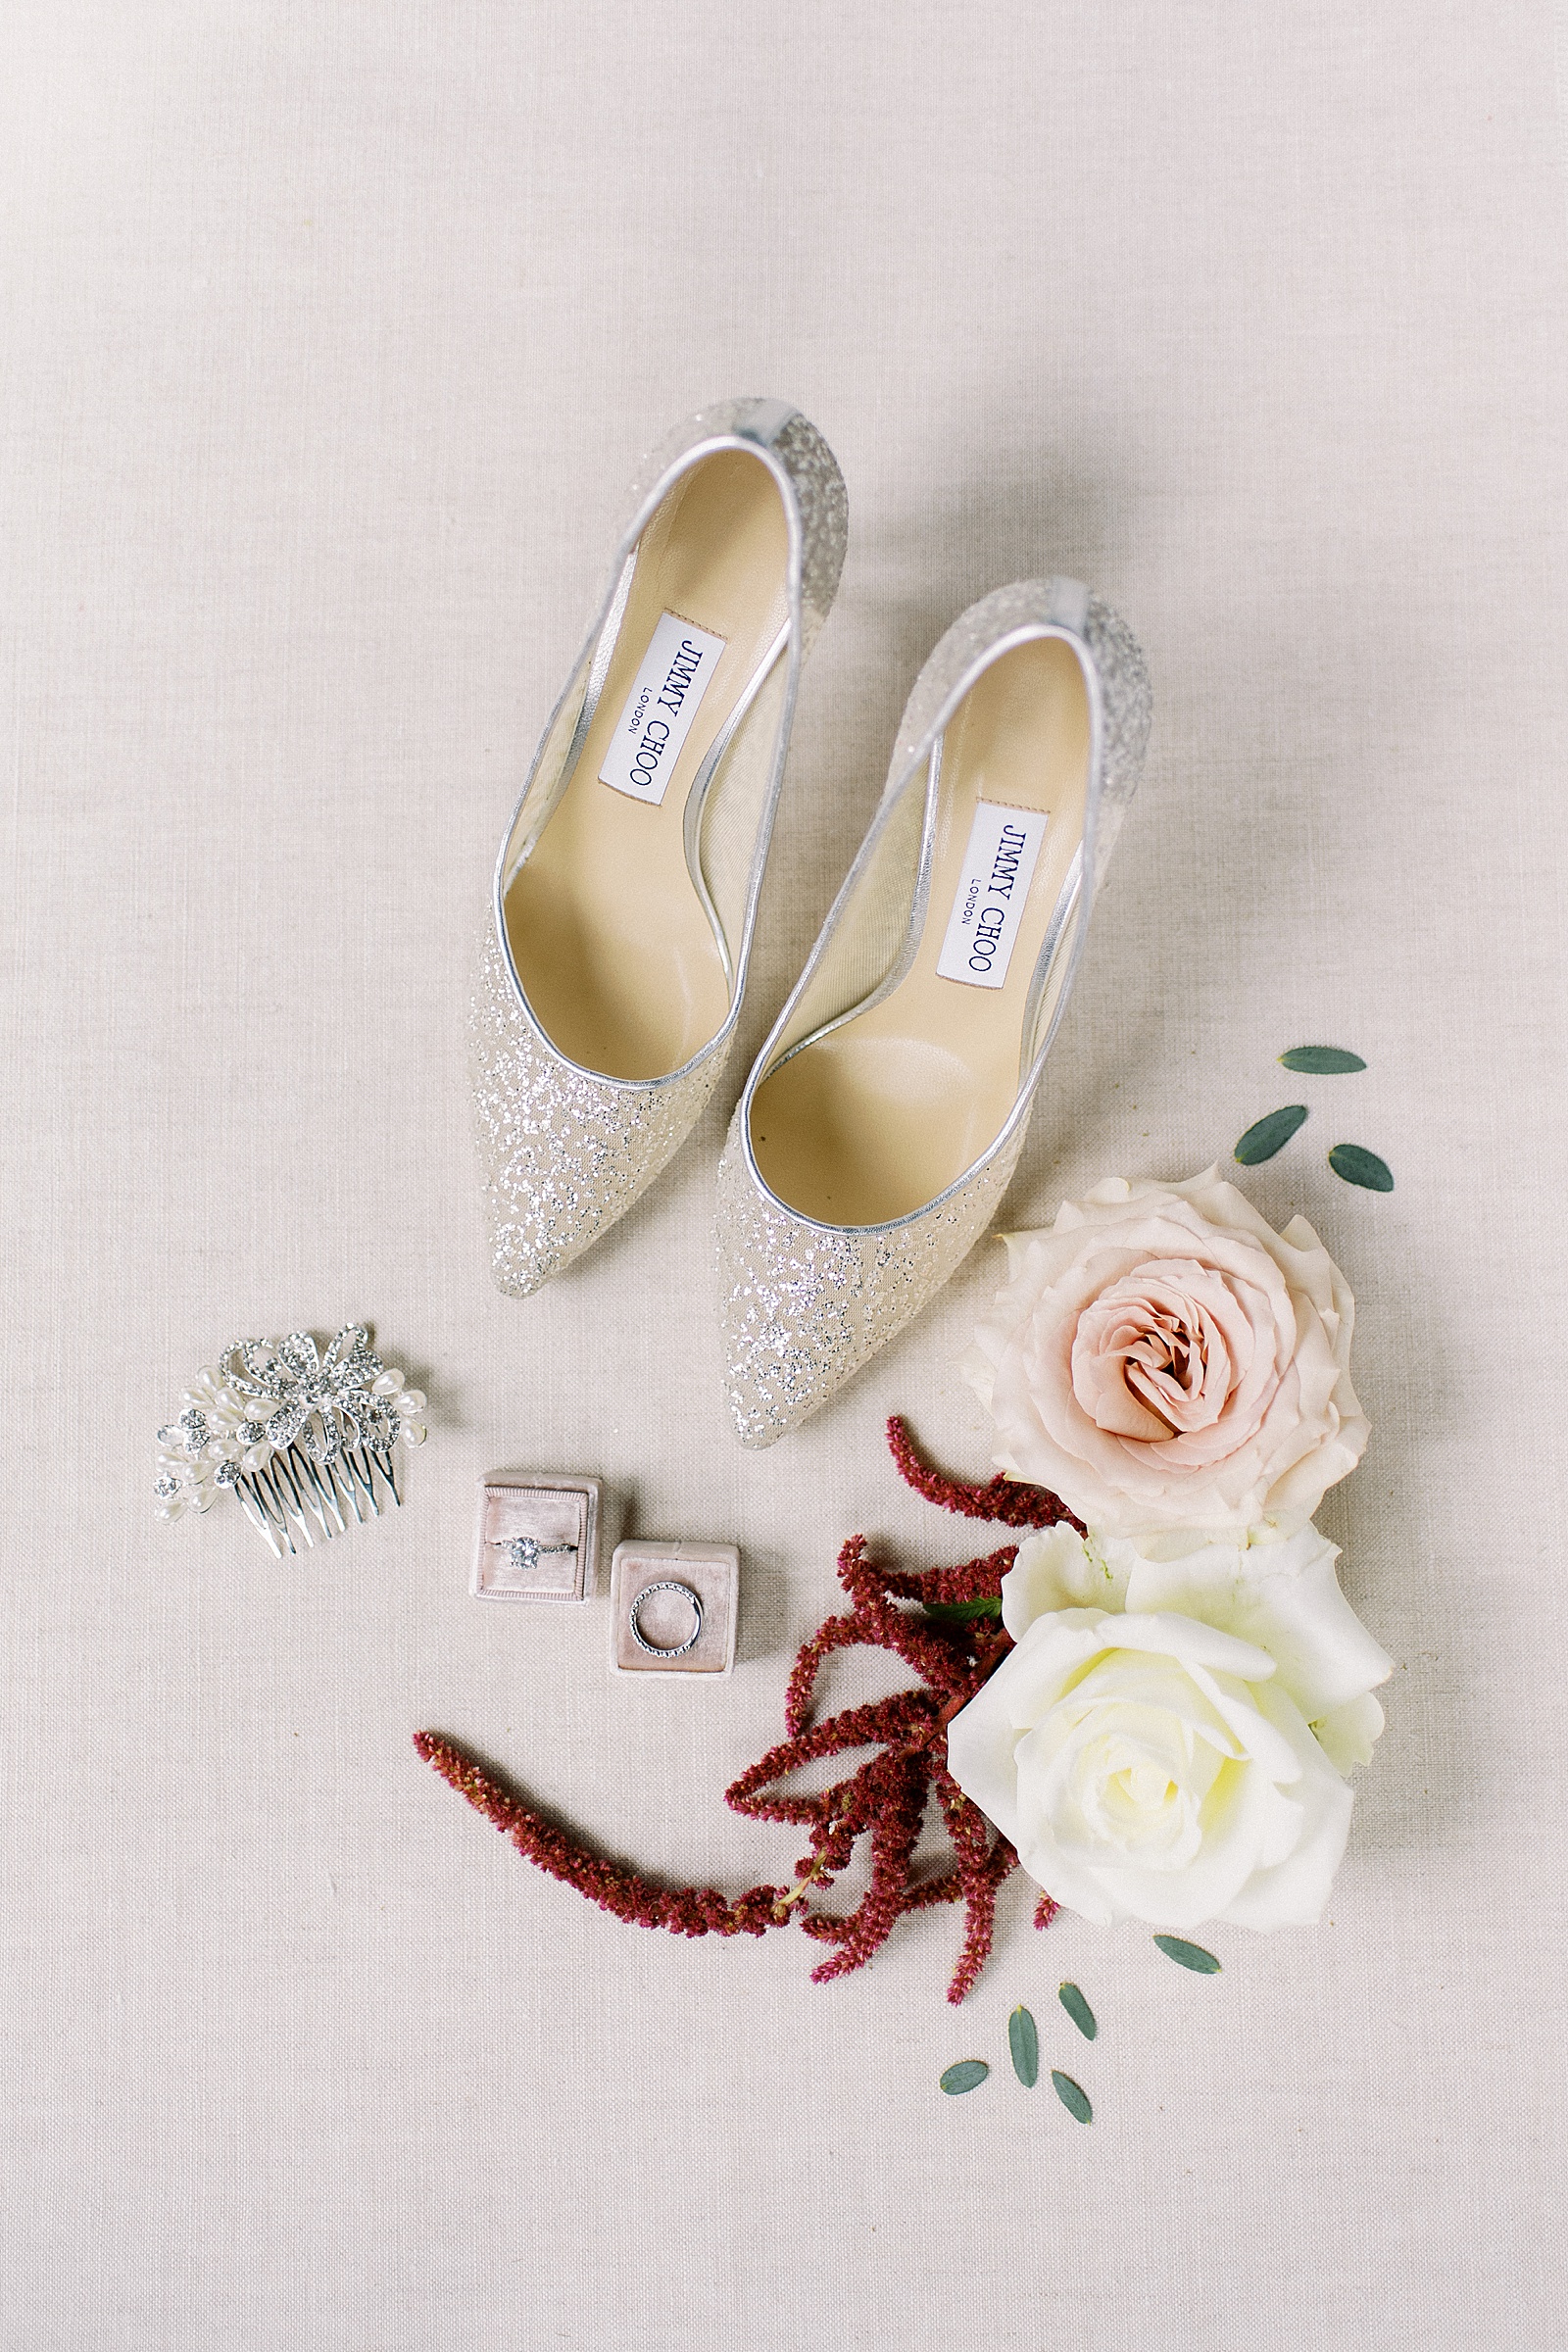 Wedding layout with Jimmy Choo shoes by photographer who runs a successful mentorship program